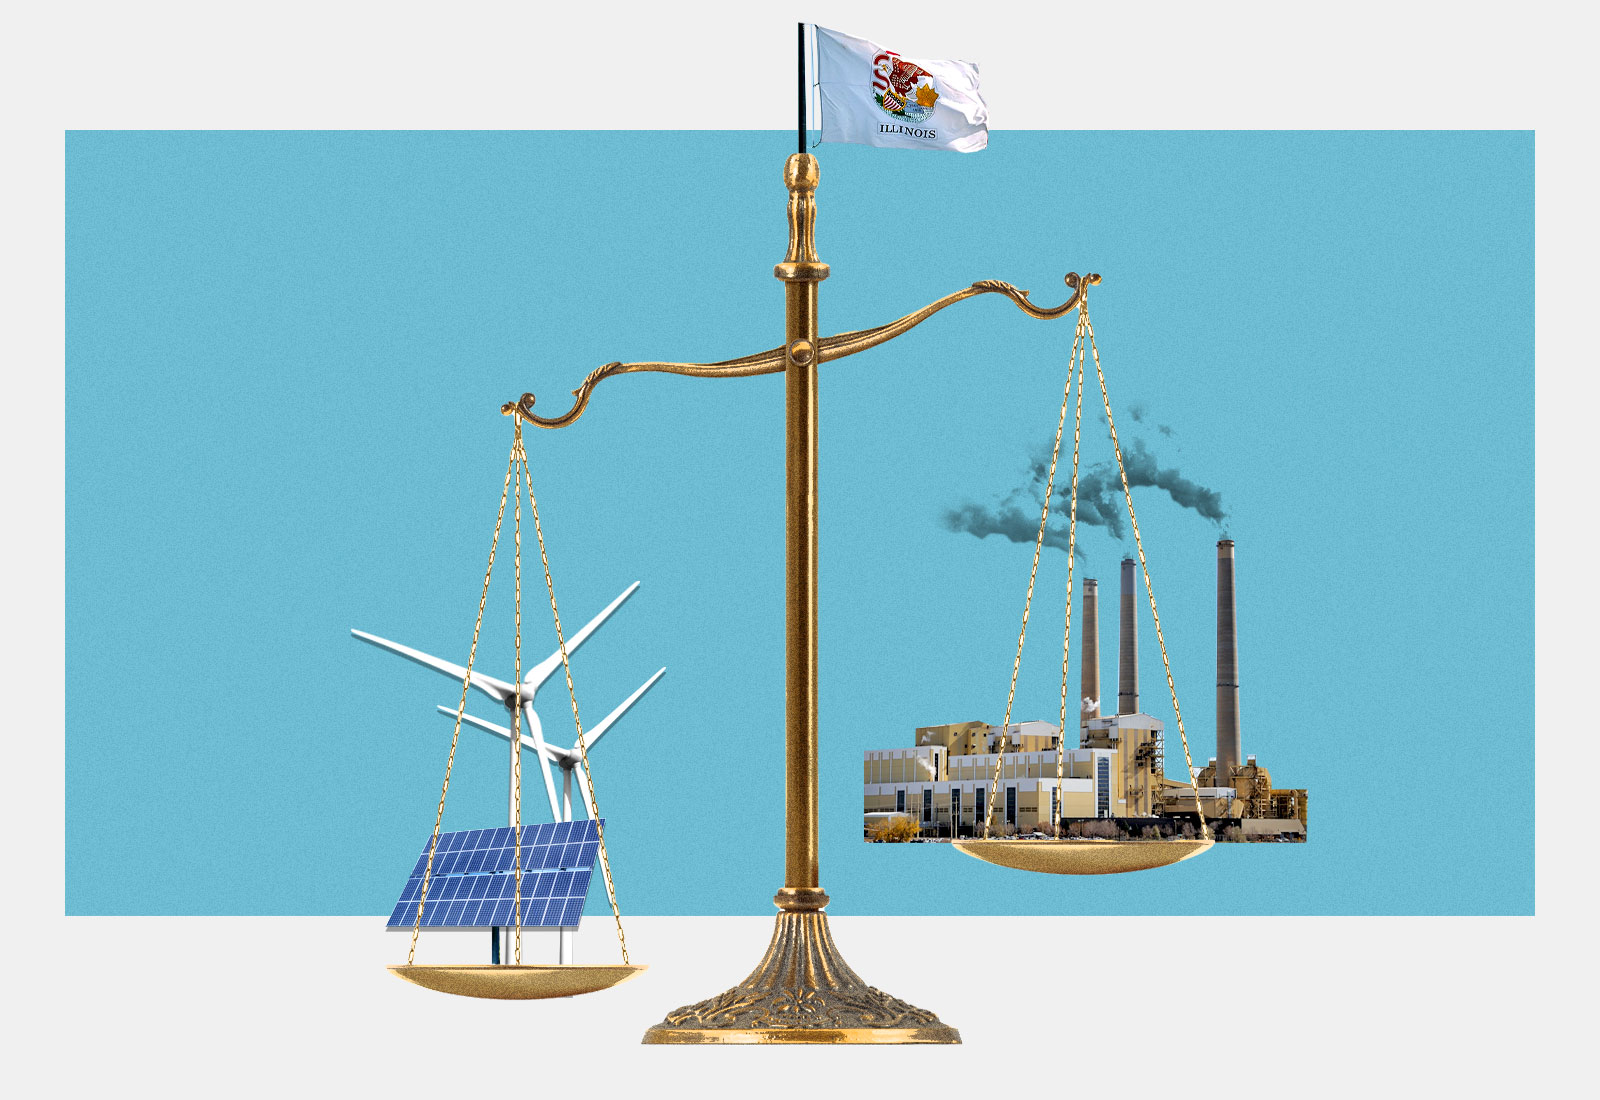 Collage: Scales with the Illinois flag holding wind turbines and a solar panel on one side and a coal plant on the other